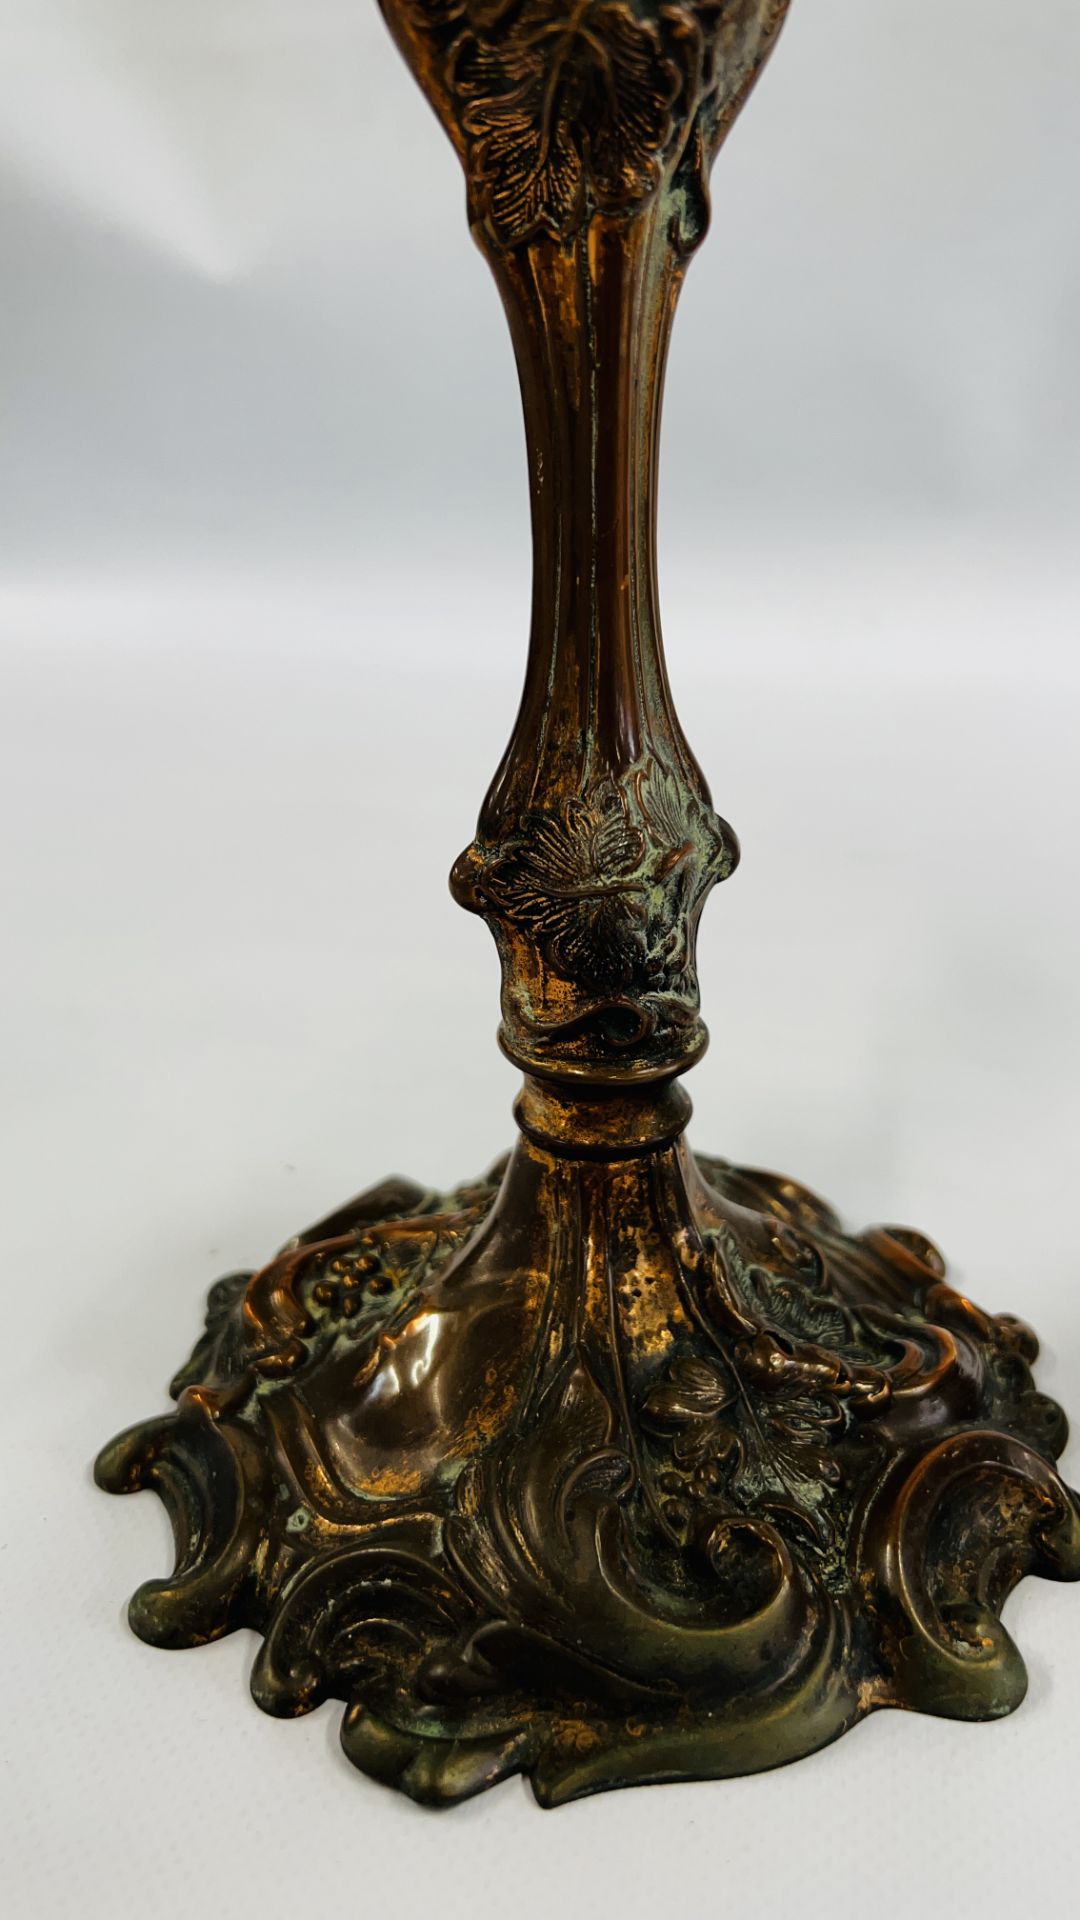 A PAIR OF ORNATE C19TH COPPER CANDLESTICKS WITH DETACHABLE SCONCES - HEIGHT 27CM. - Image 5 of 20